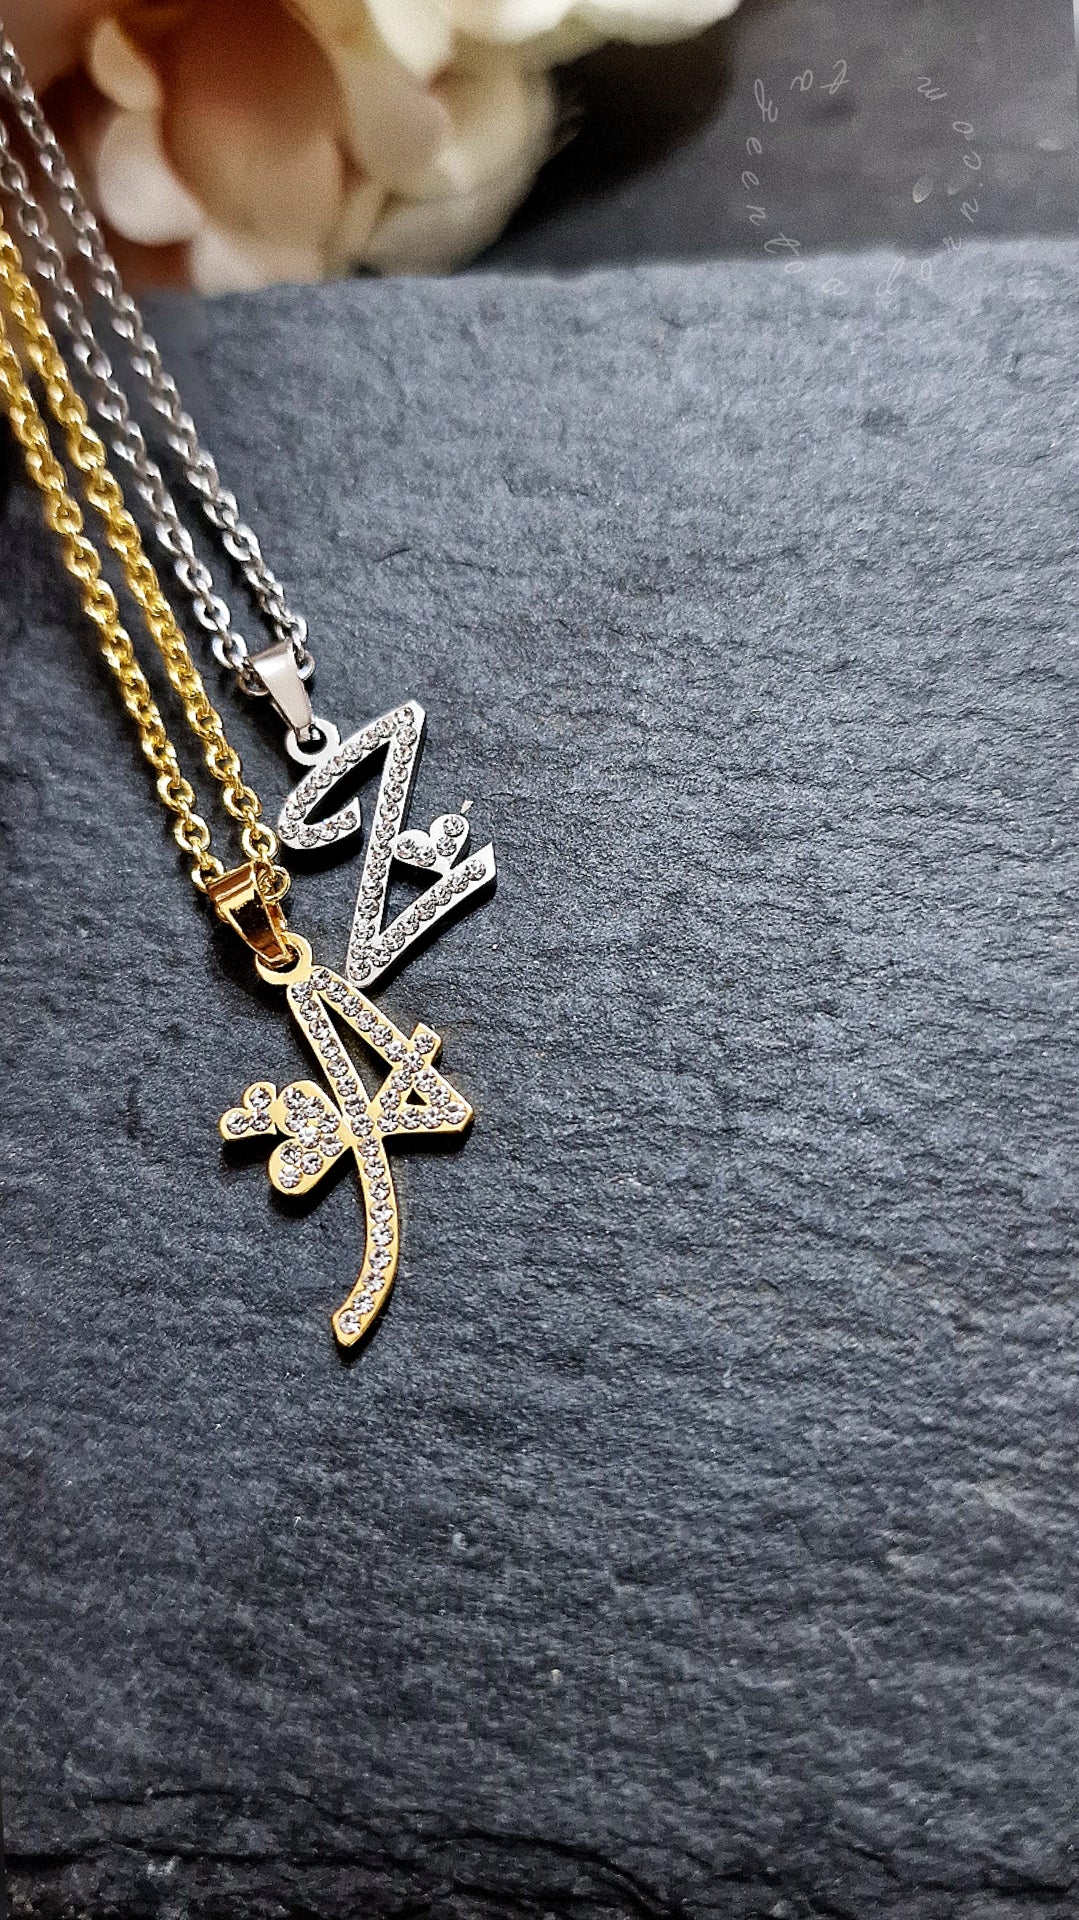 Personalised 9ct Gold Russian Diamond Necklace By Posh Totty Designs |  notonthehighstreet.com